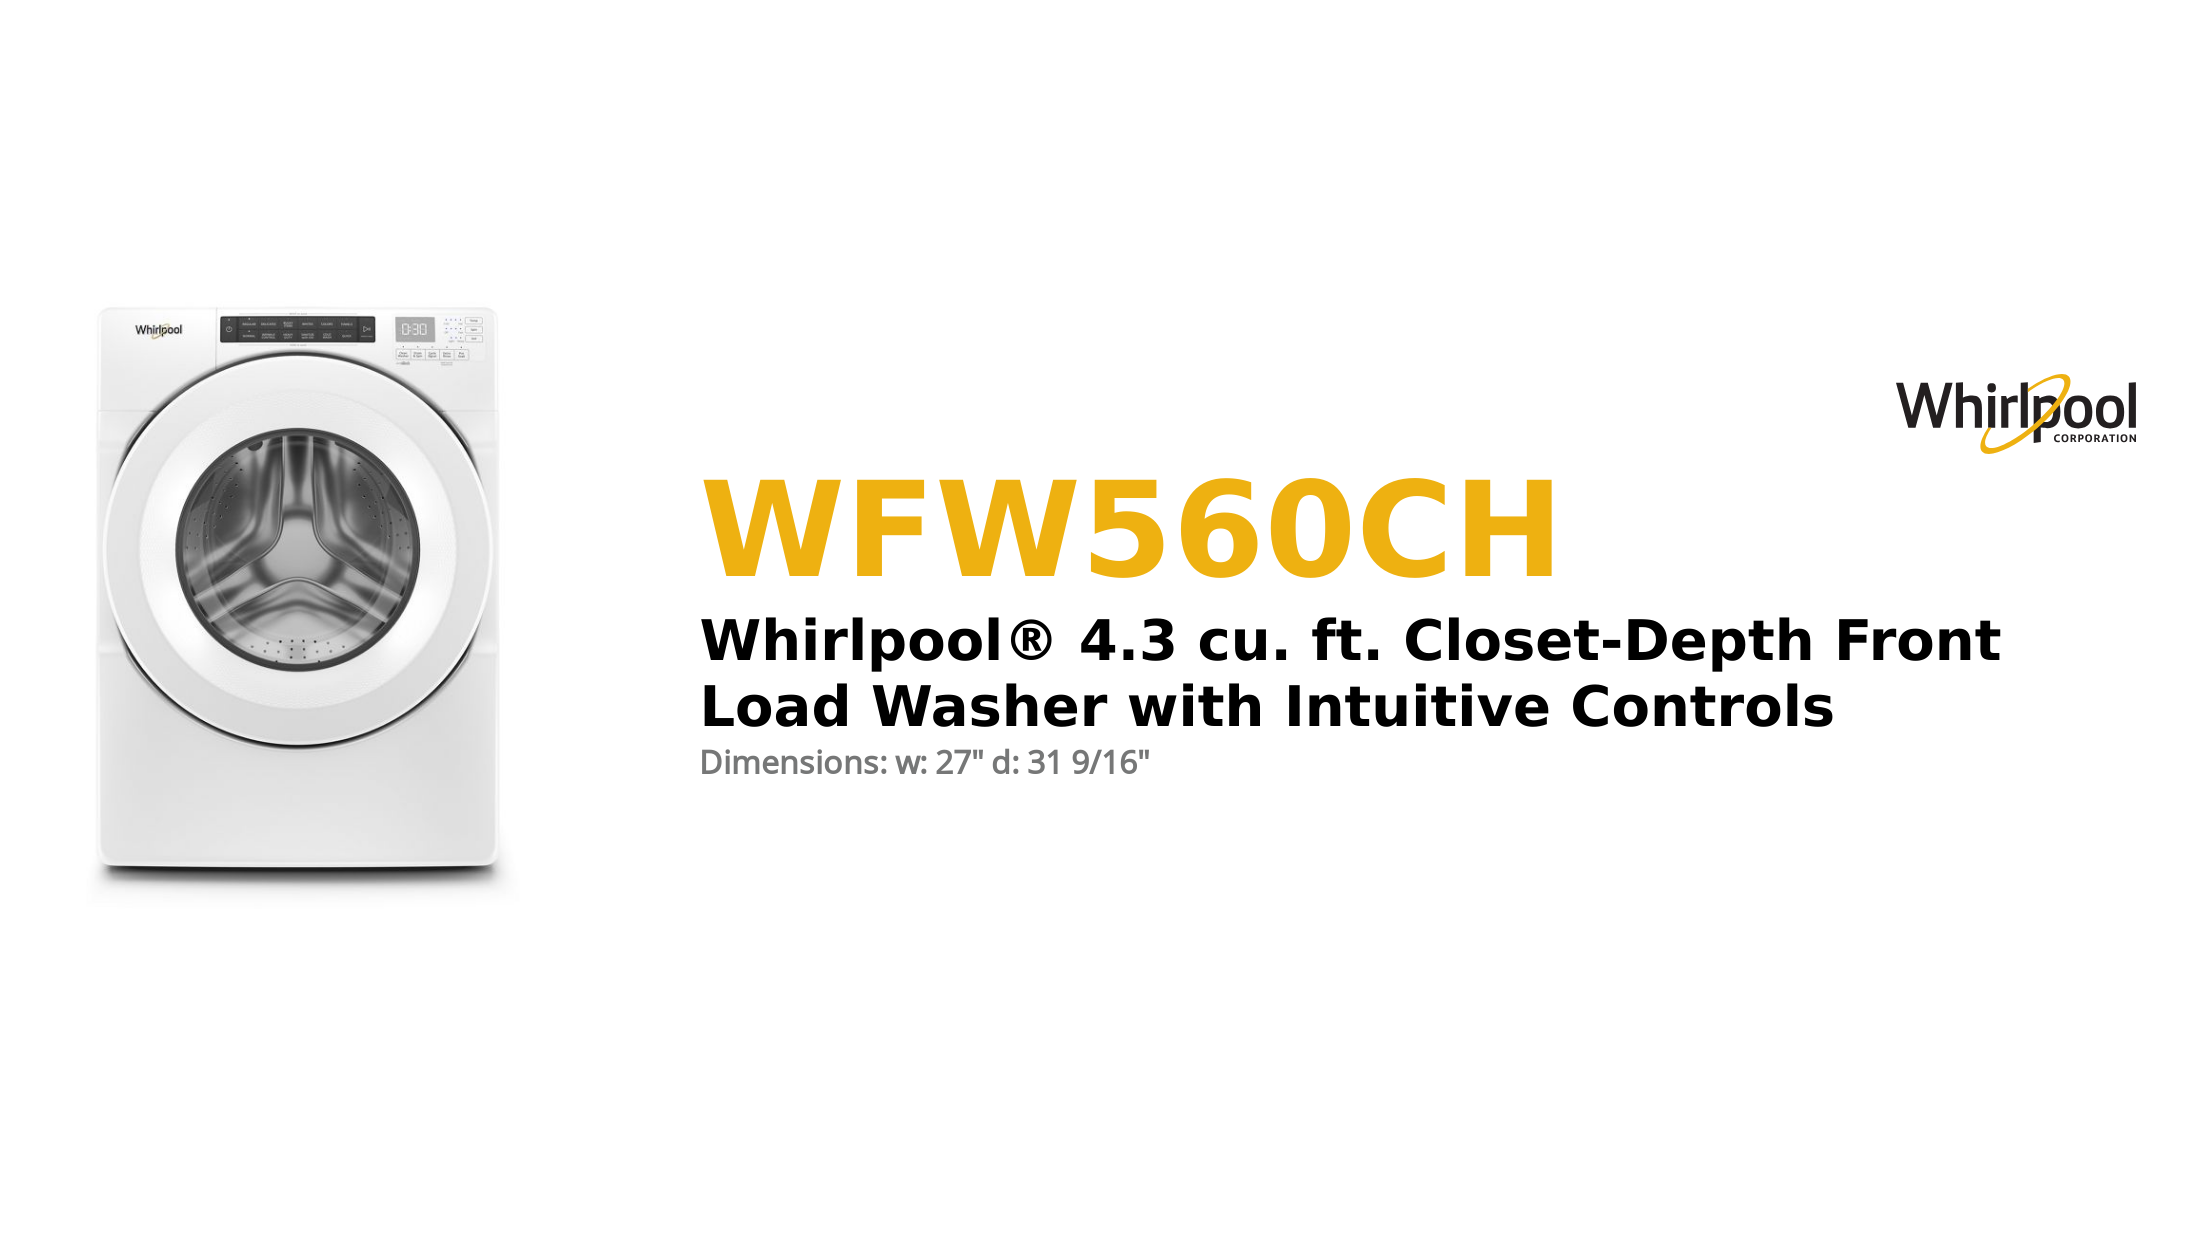 Whirlpool® 4.3 cu. ft. Closet-Depth Front Load Washer with Intuitive Controls